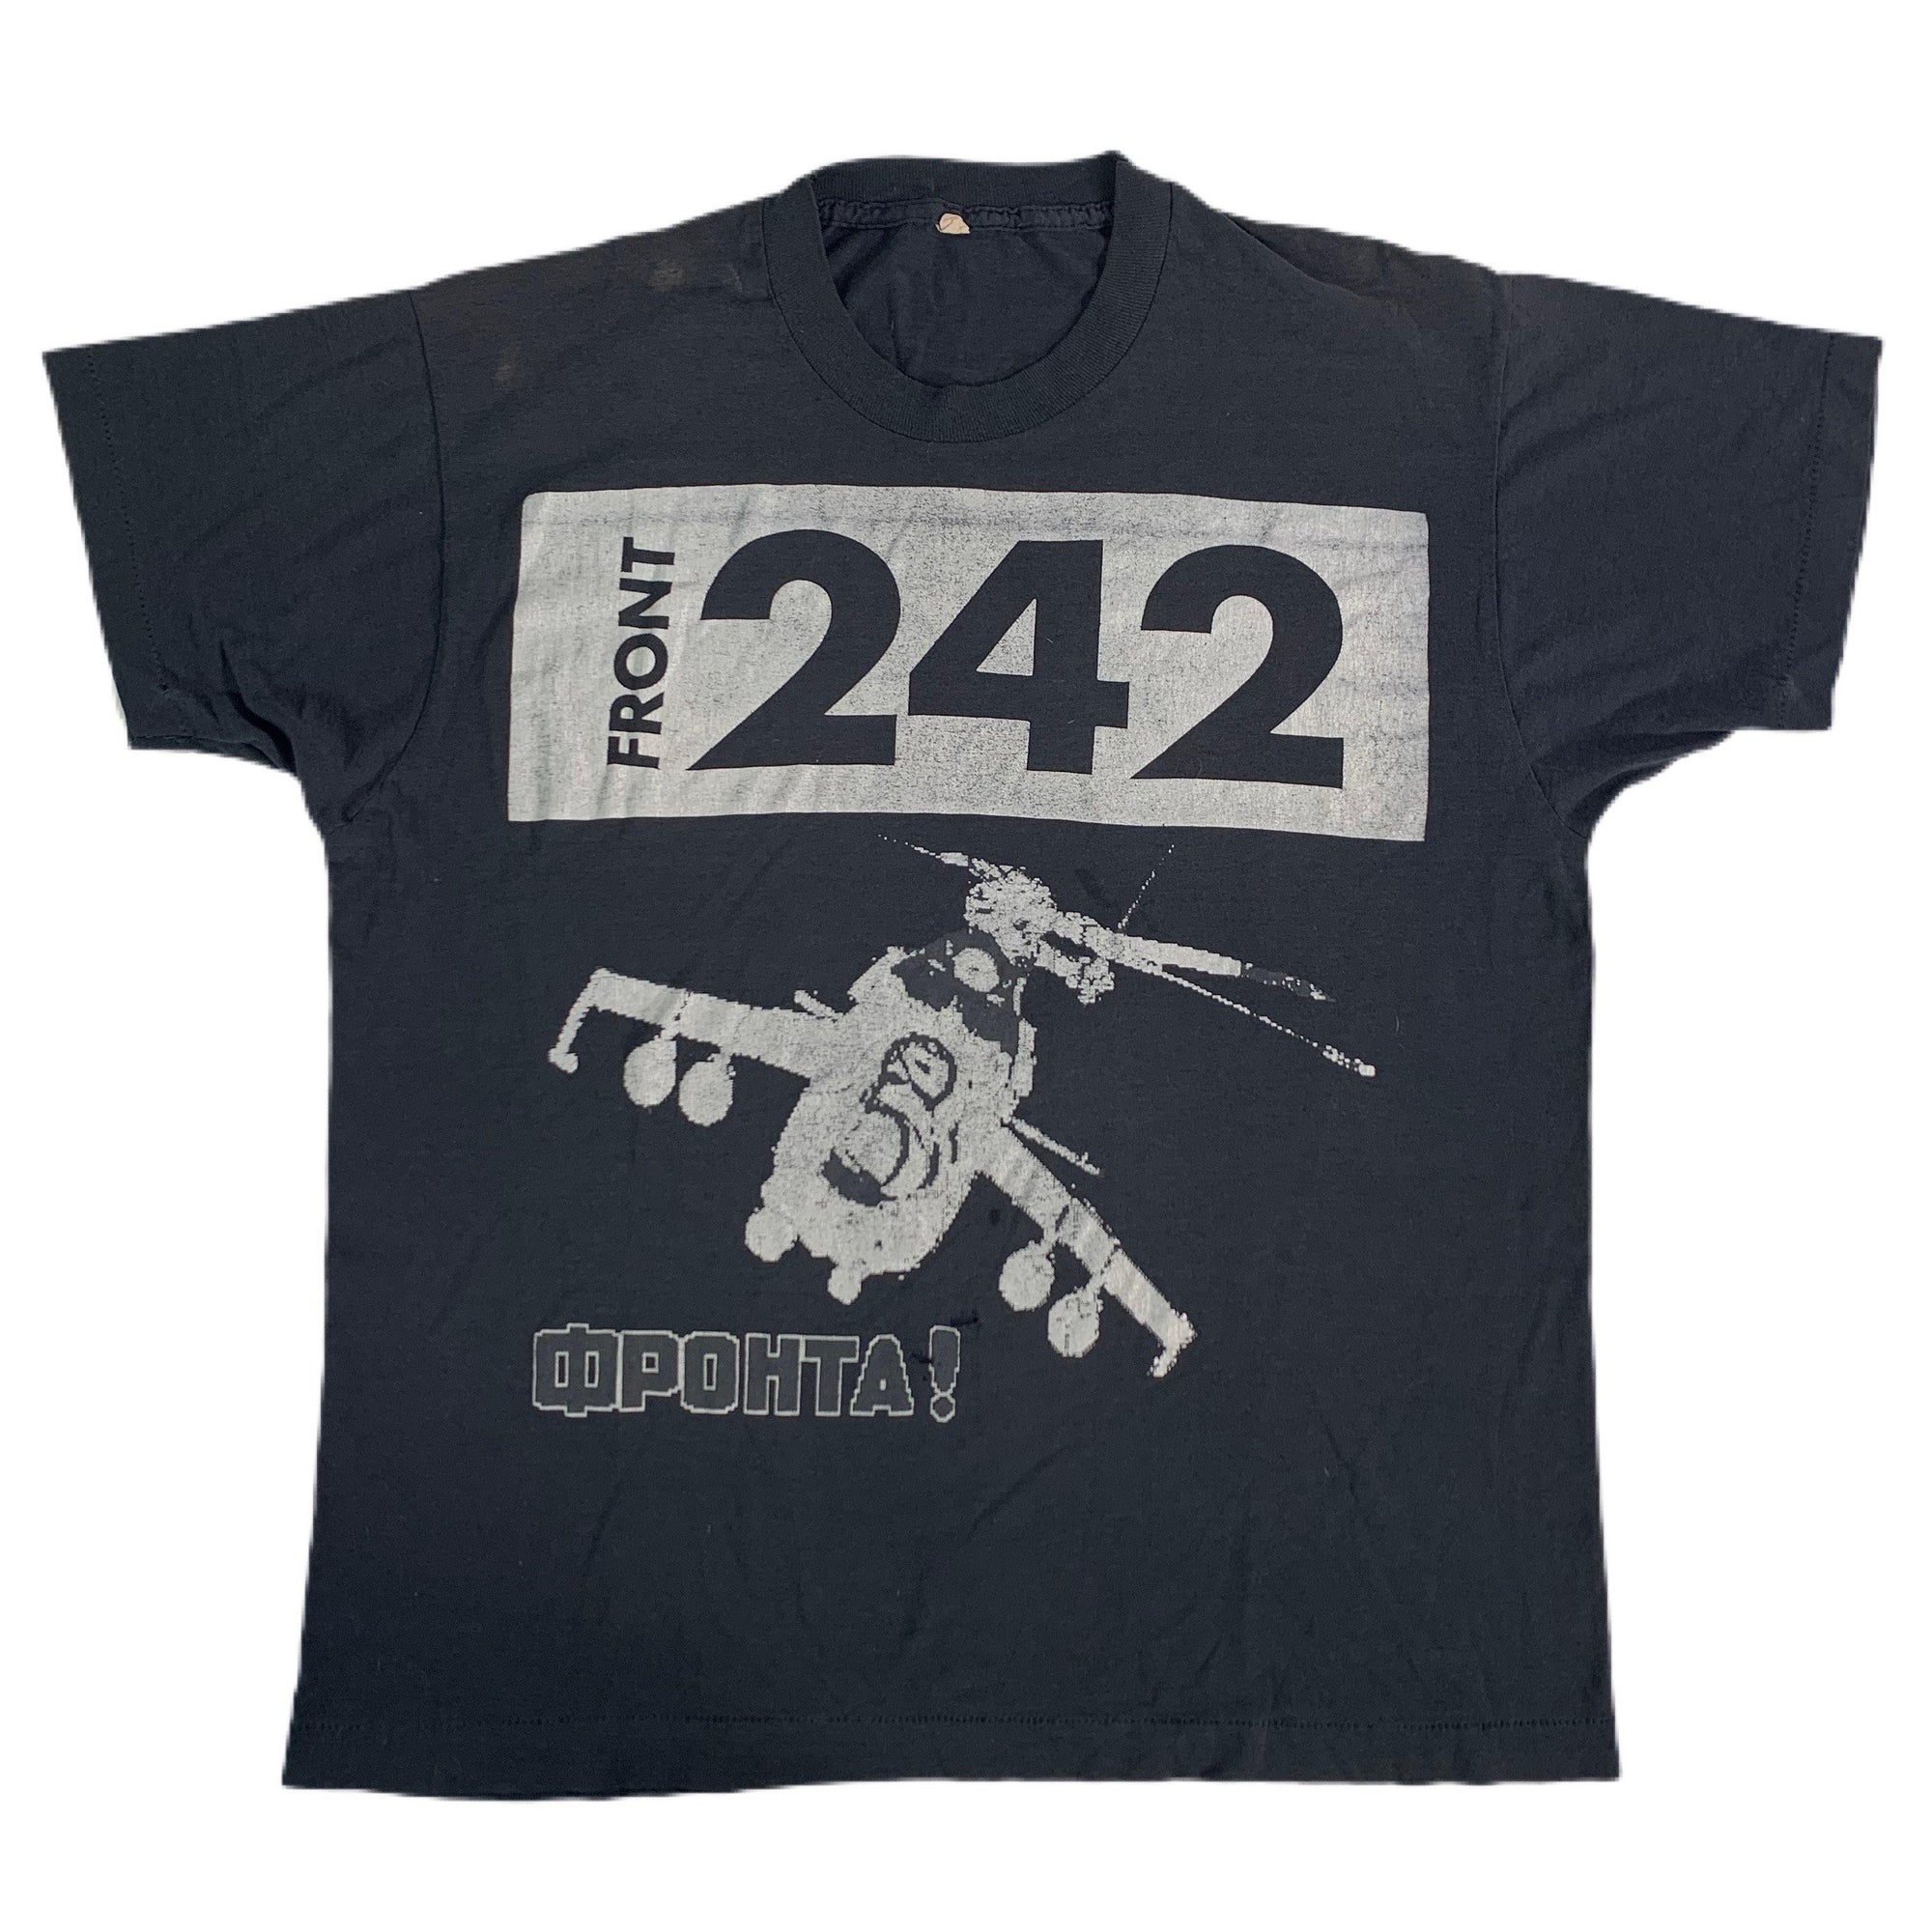 Vintage Front 242 "Helicopter" T-Shirt - jointcustodydc